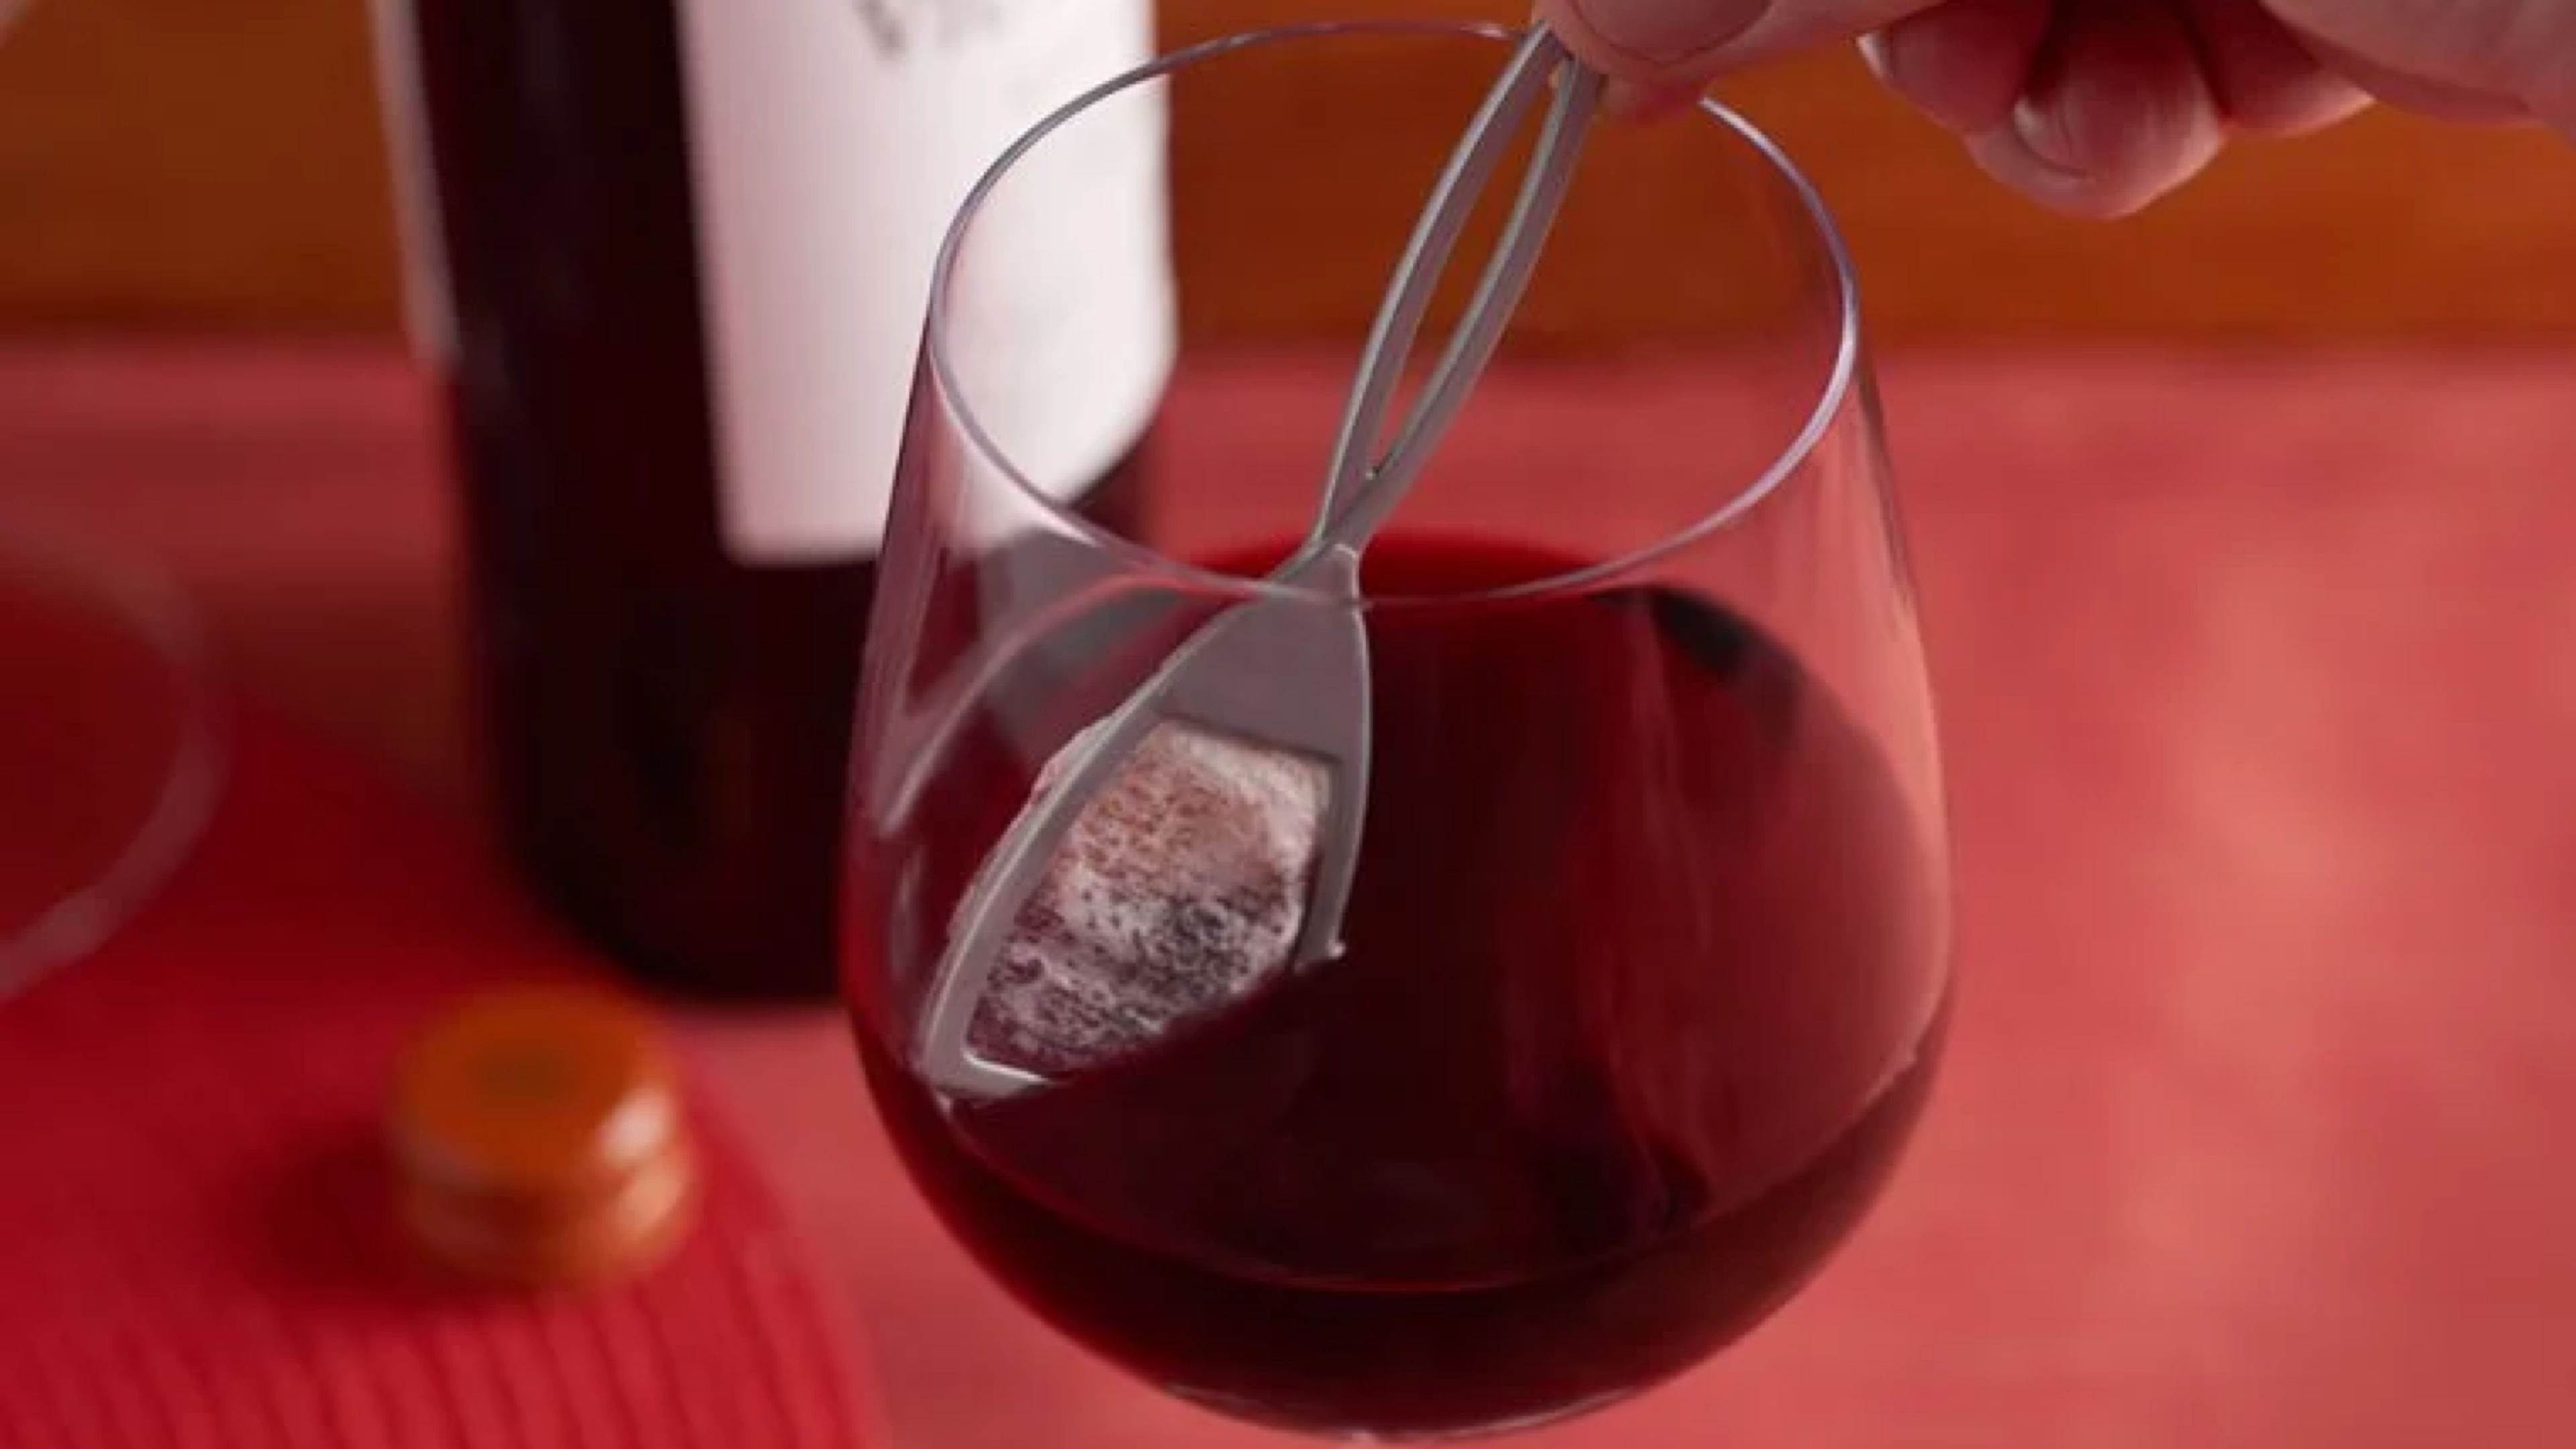 wine filter that can help reduce hangover symptoms